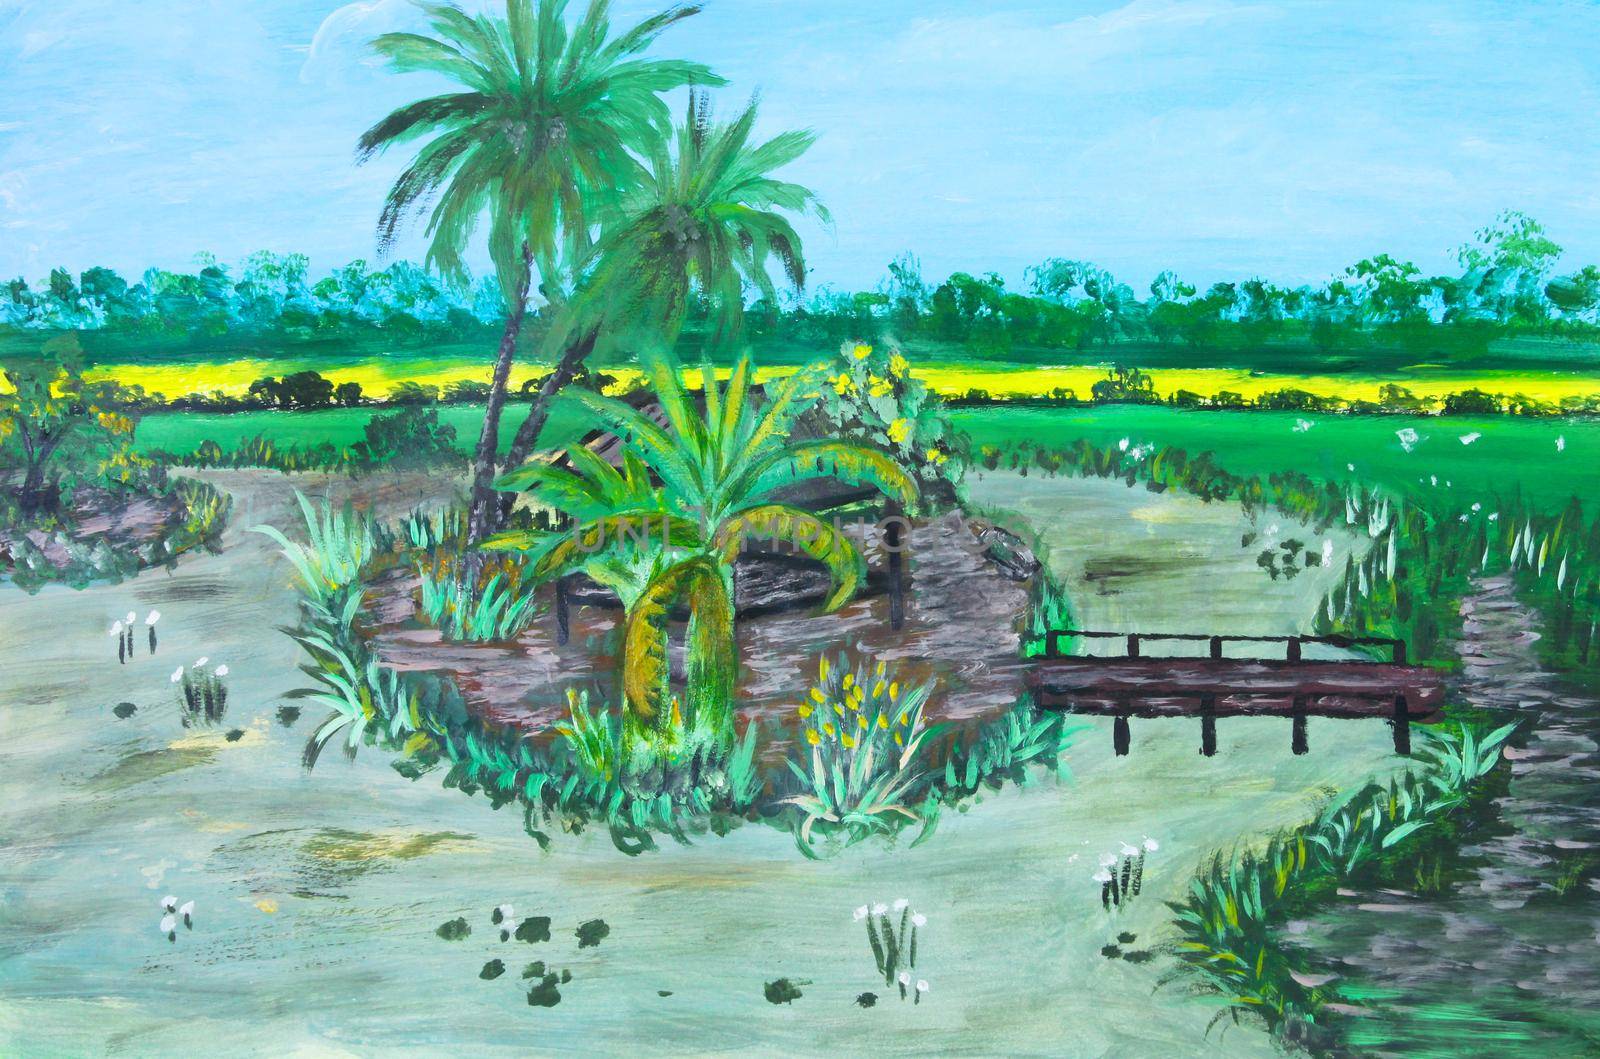 Oil painting on canvas of rural Thai countryside of small hut in middle of river by rice paddies